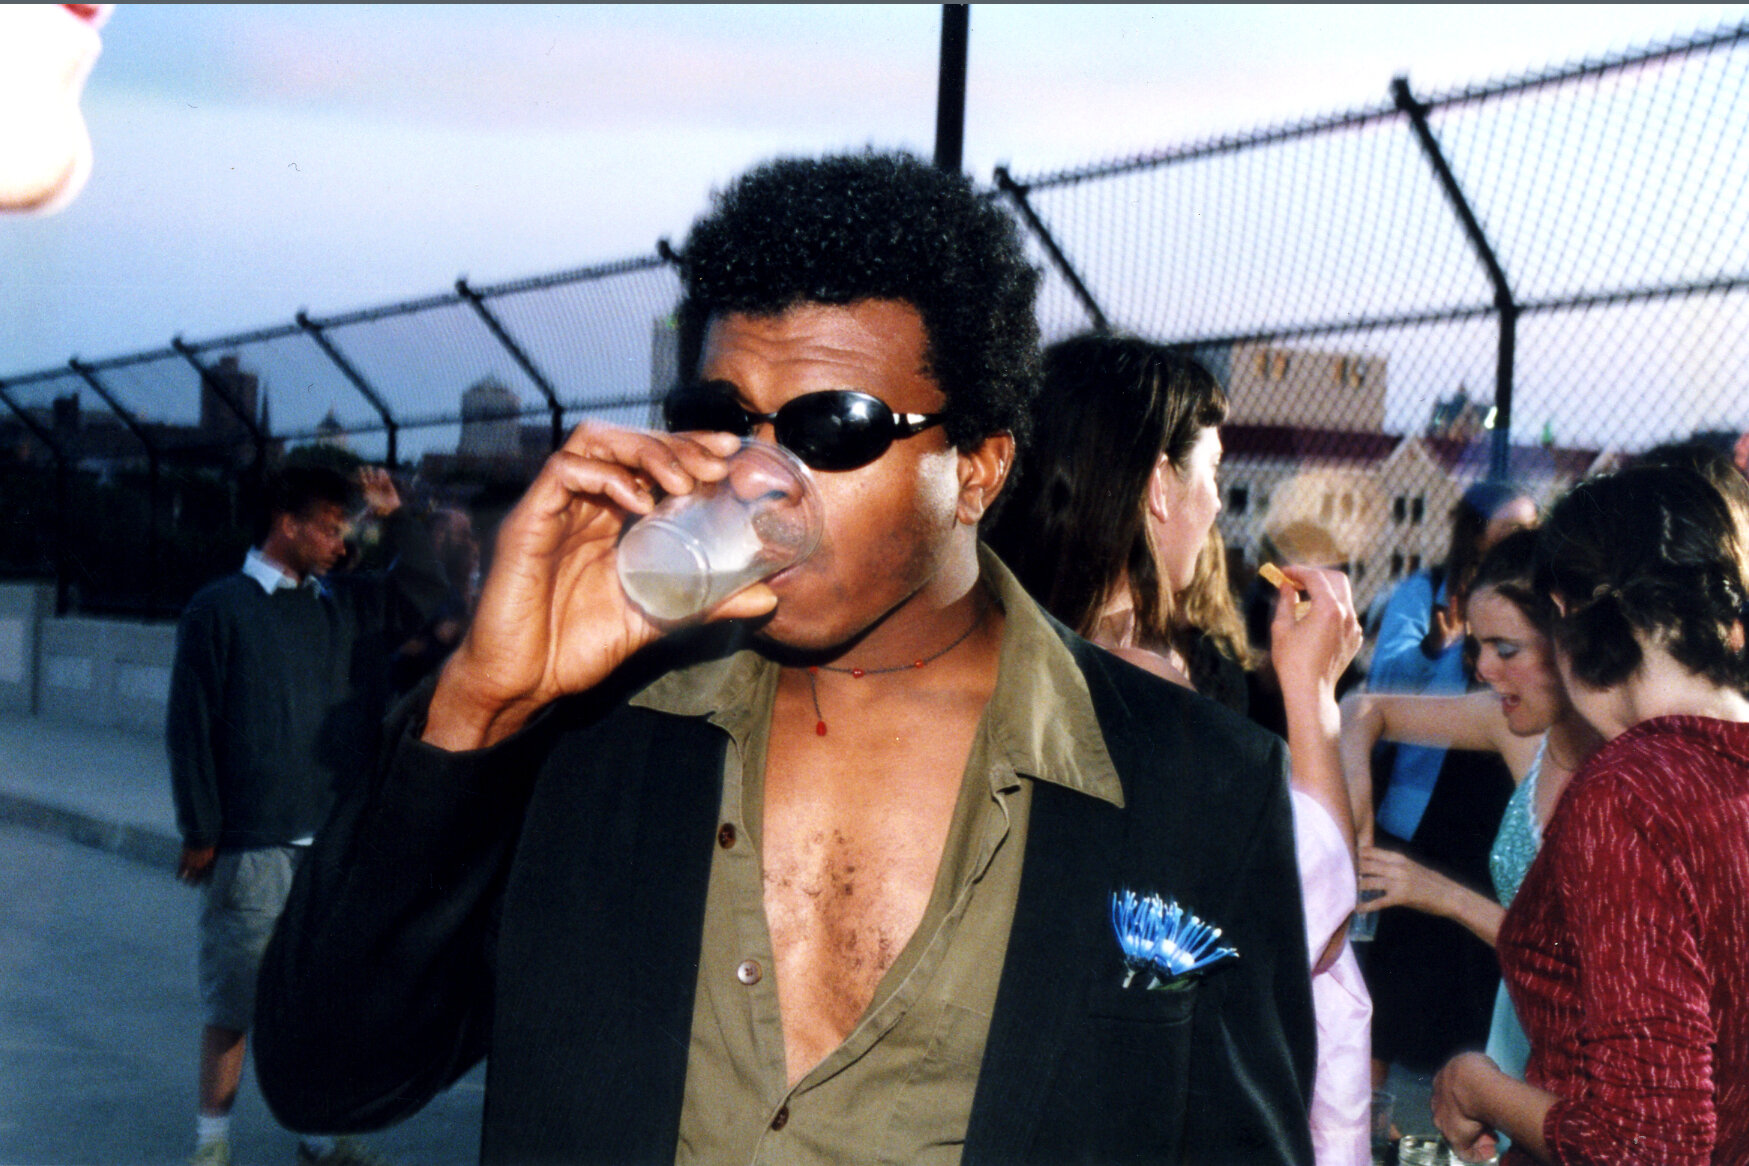 Man in green shirt and black coat with blue flower in pocket and sunglasses drinking from cup, people conversing behind him.